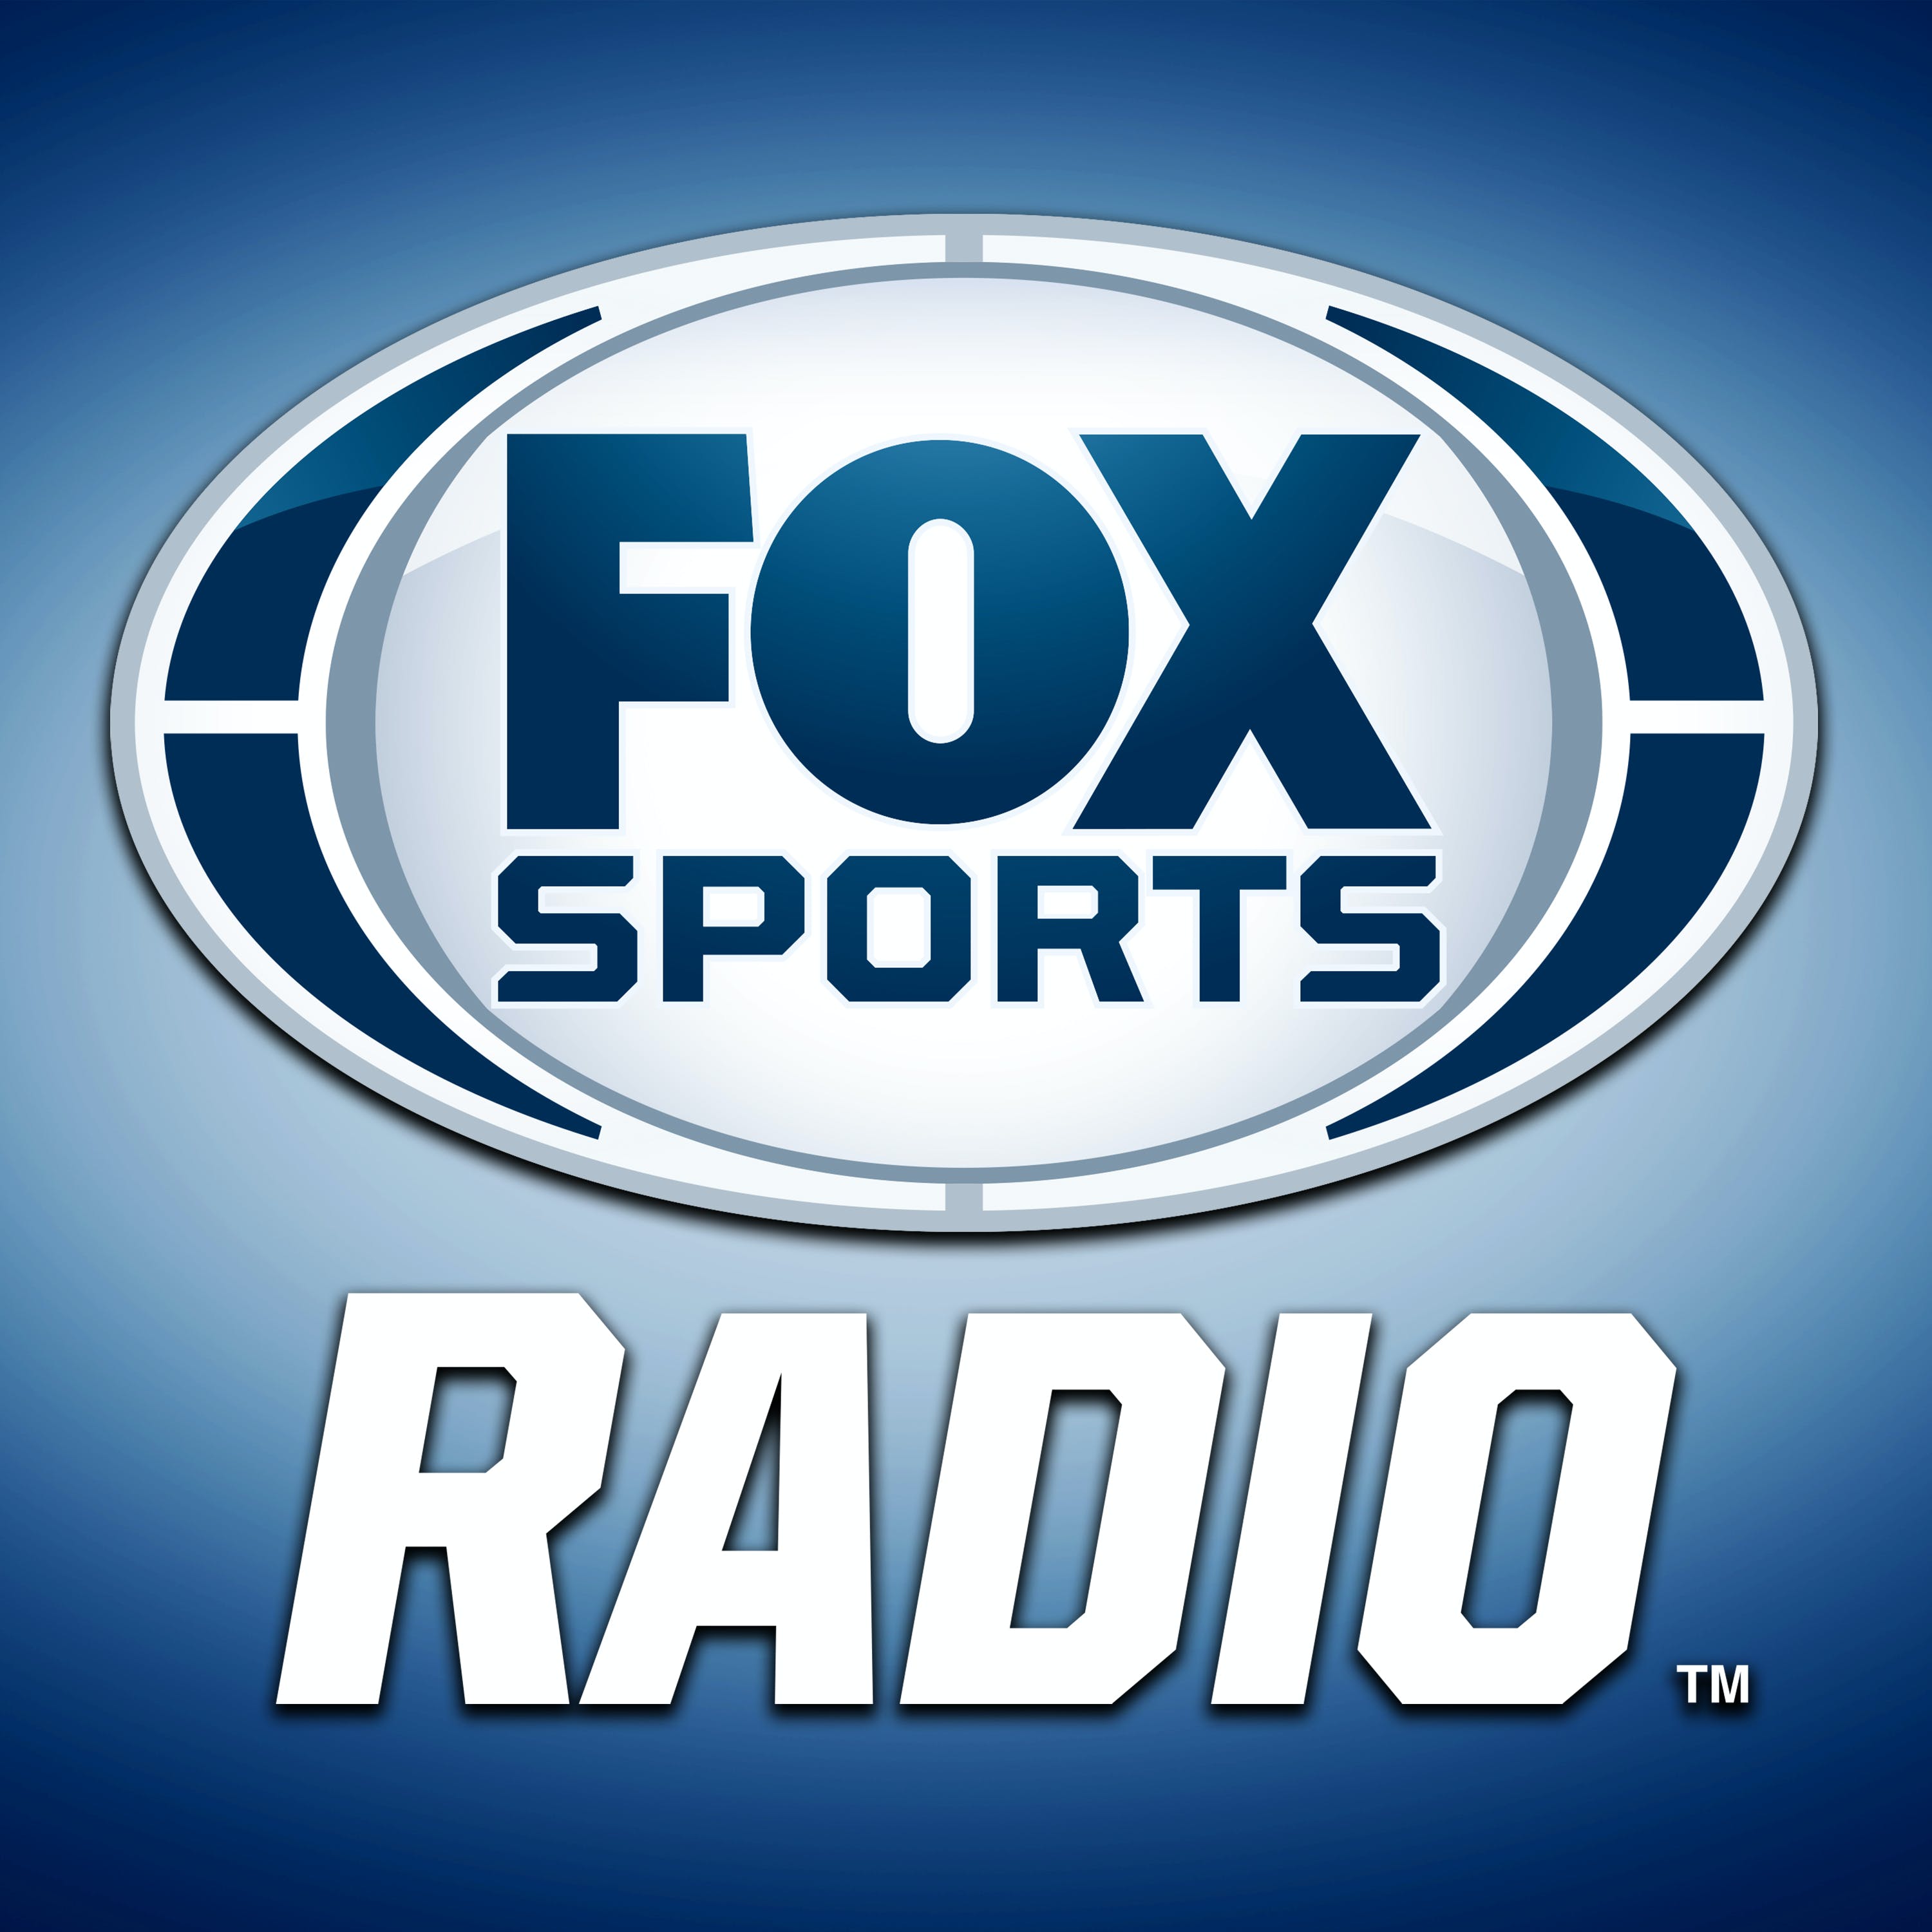 03/06/2021 - FOX Sports Saturday with Arnie Spanier and Aaron Torres